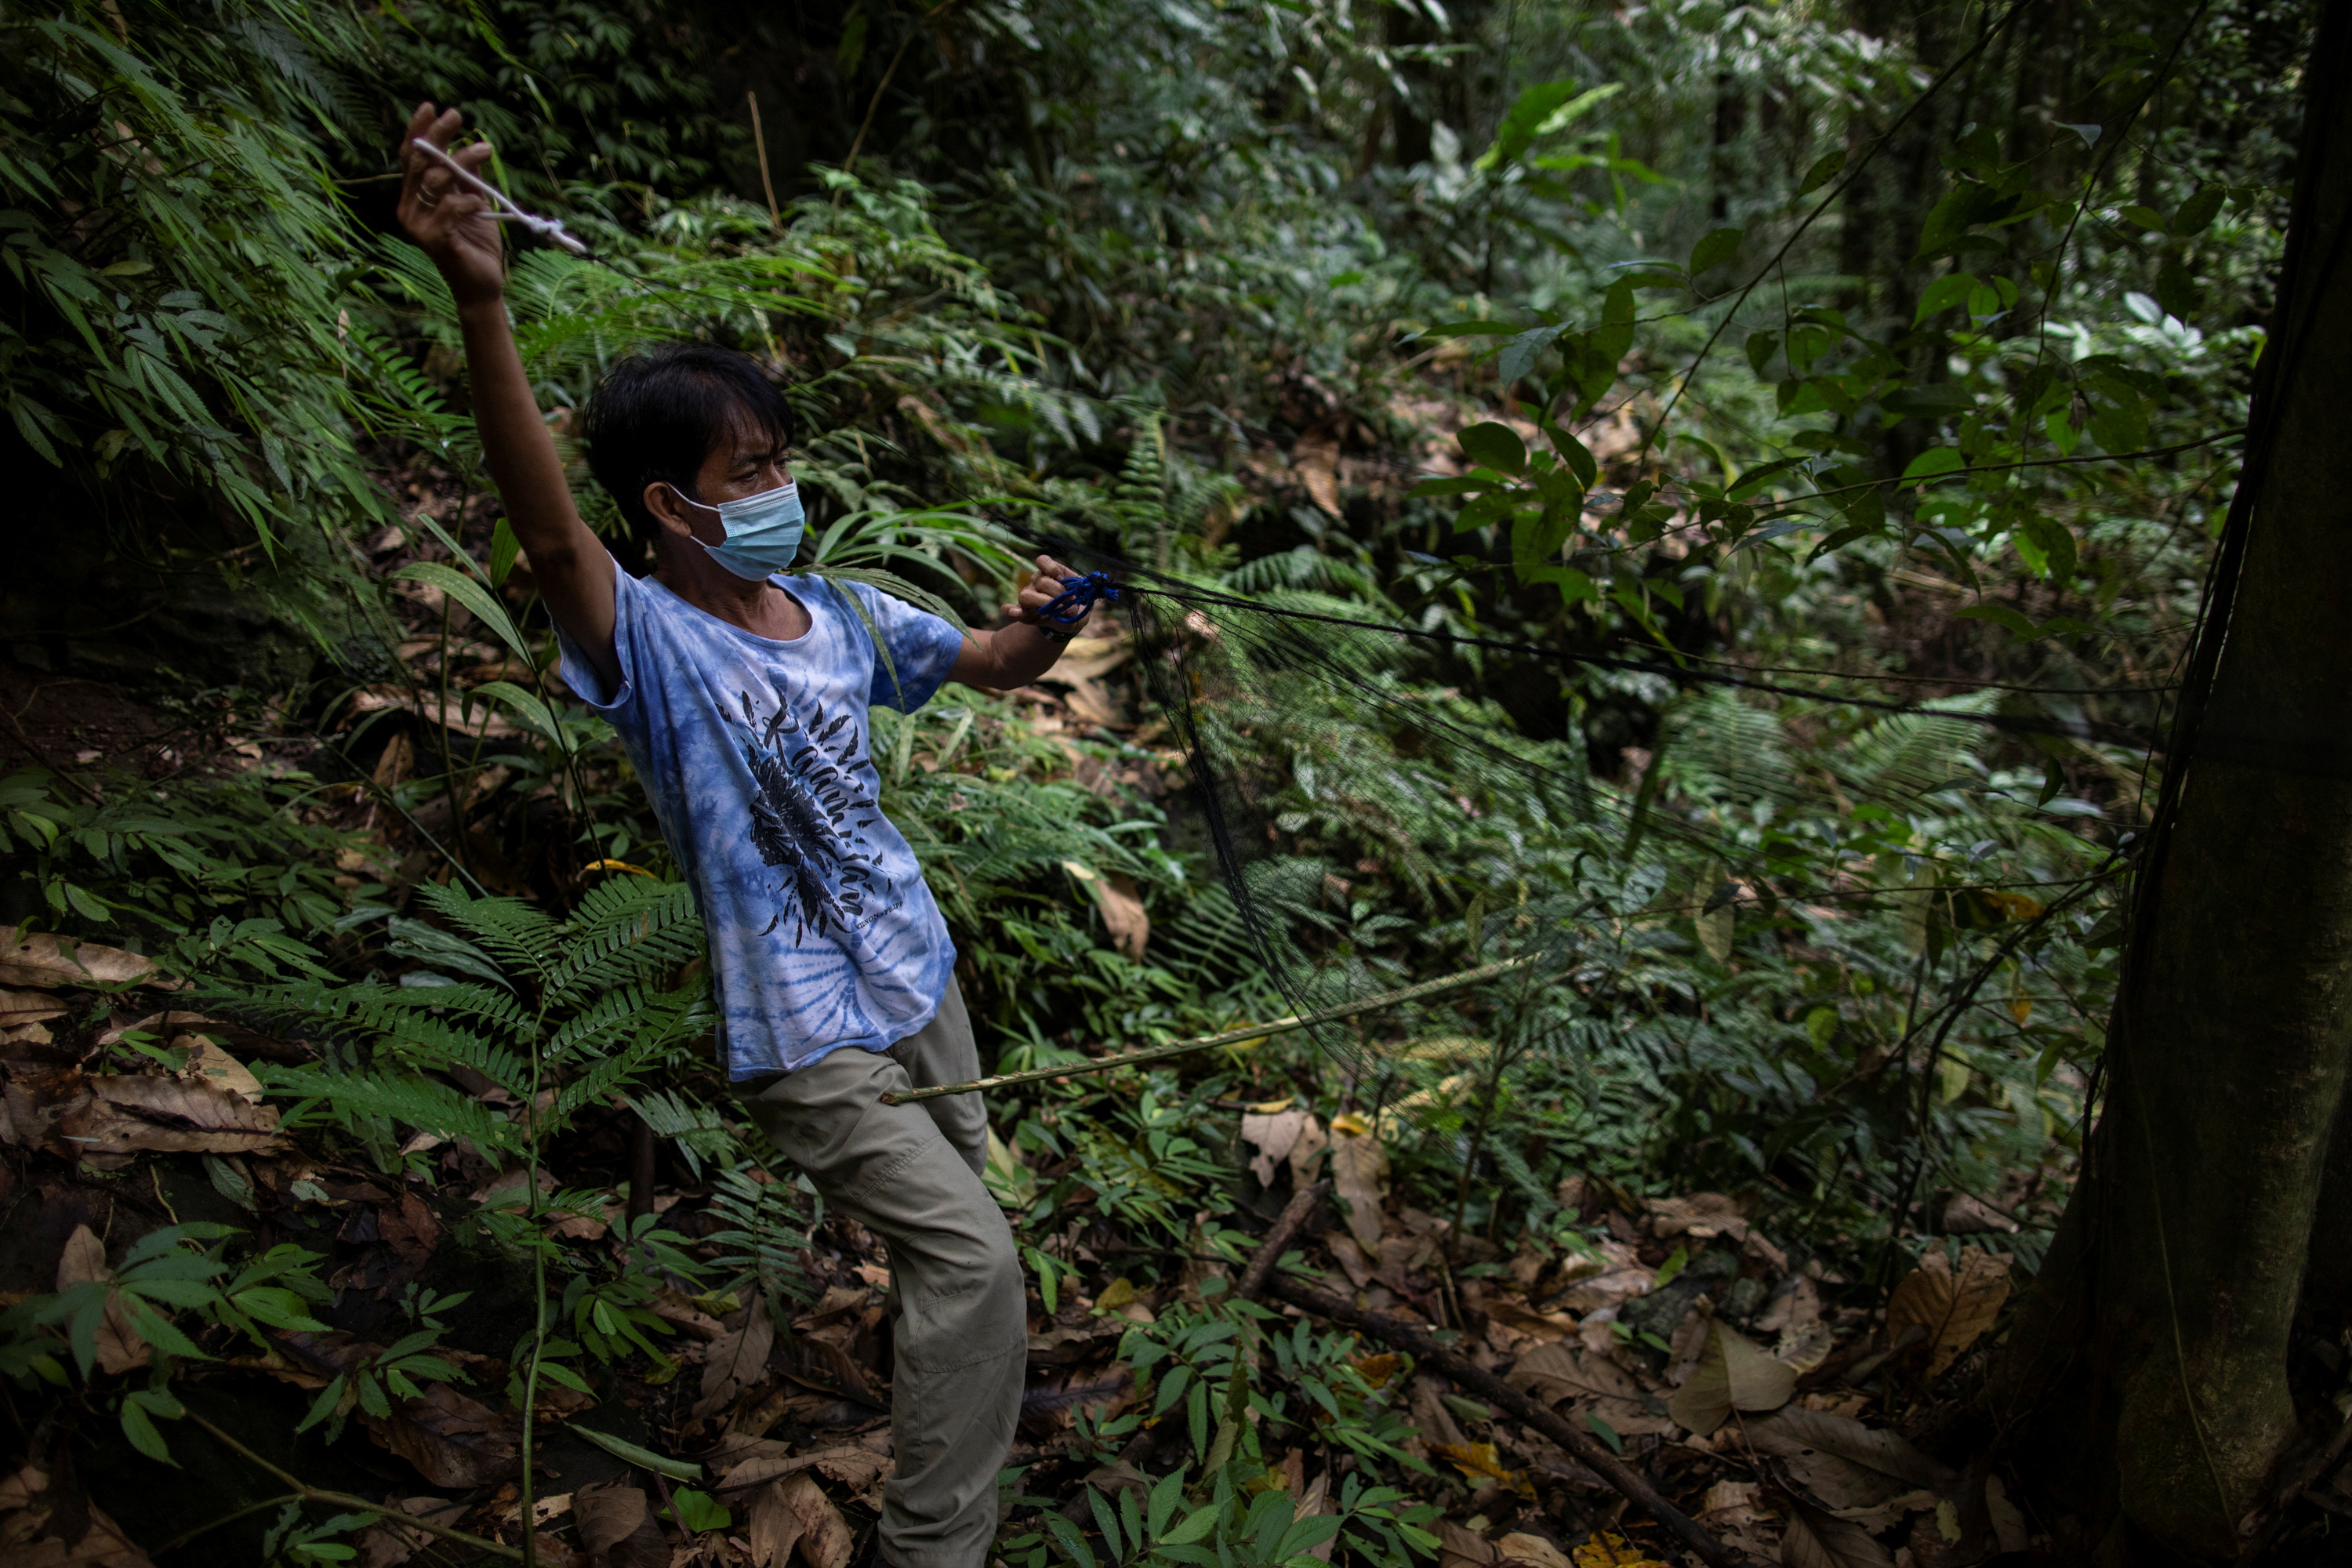 The Wider Image: By catching bats, these 'virus hunters' hope to stop the next pandemic